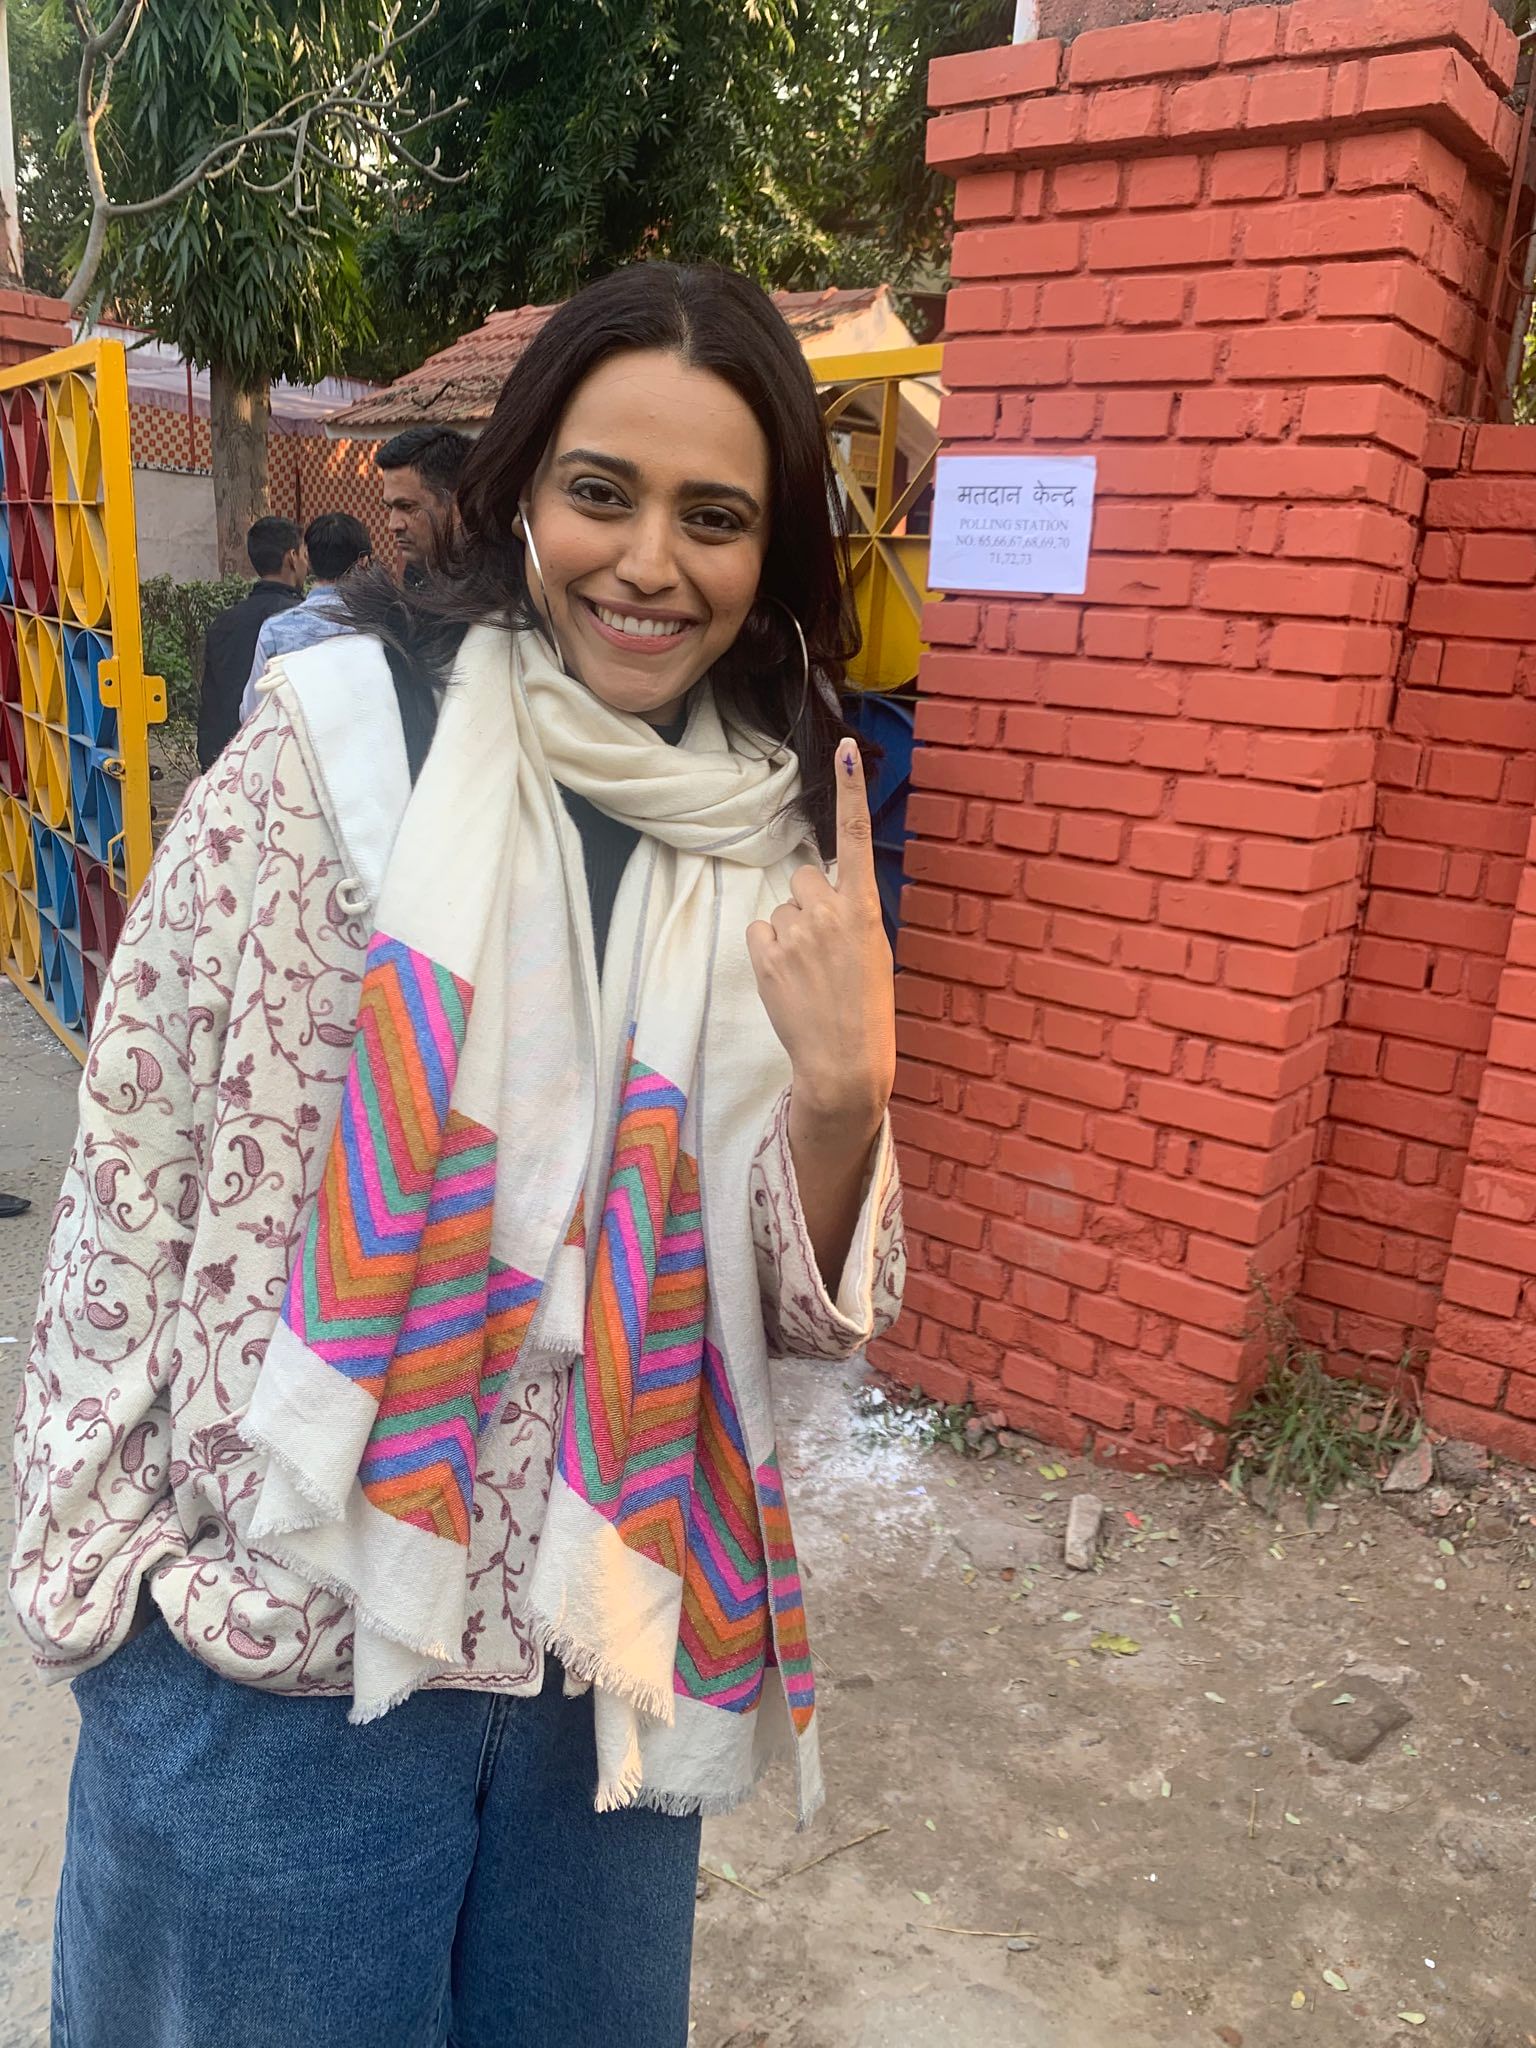 Proceeds from the event will be split between organisations working towards welfare of the widows of war veterans and empowerment of women in public spaces.  (Credit: Twitter/ReallySwara)